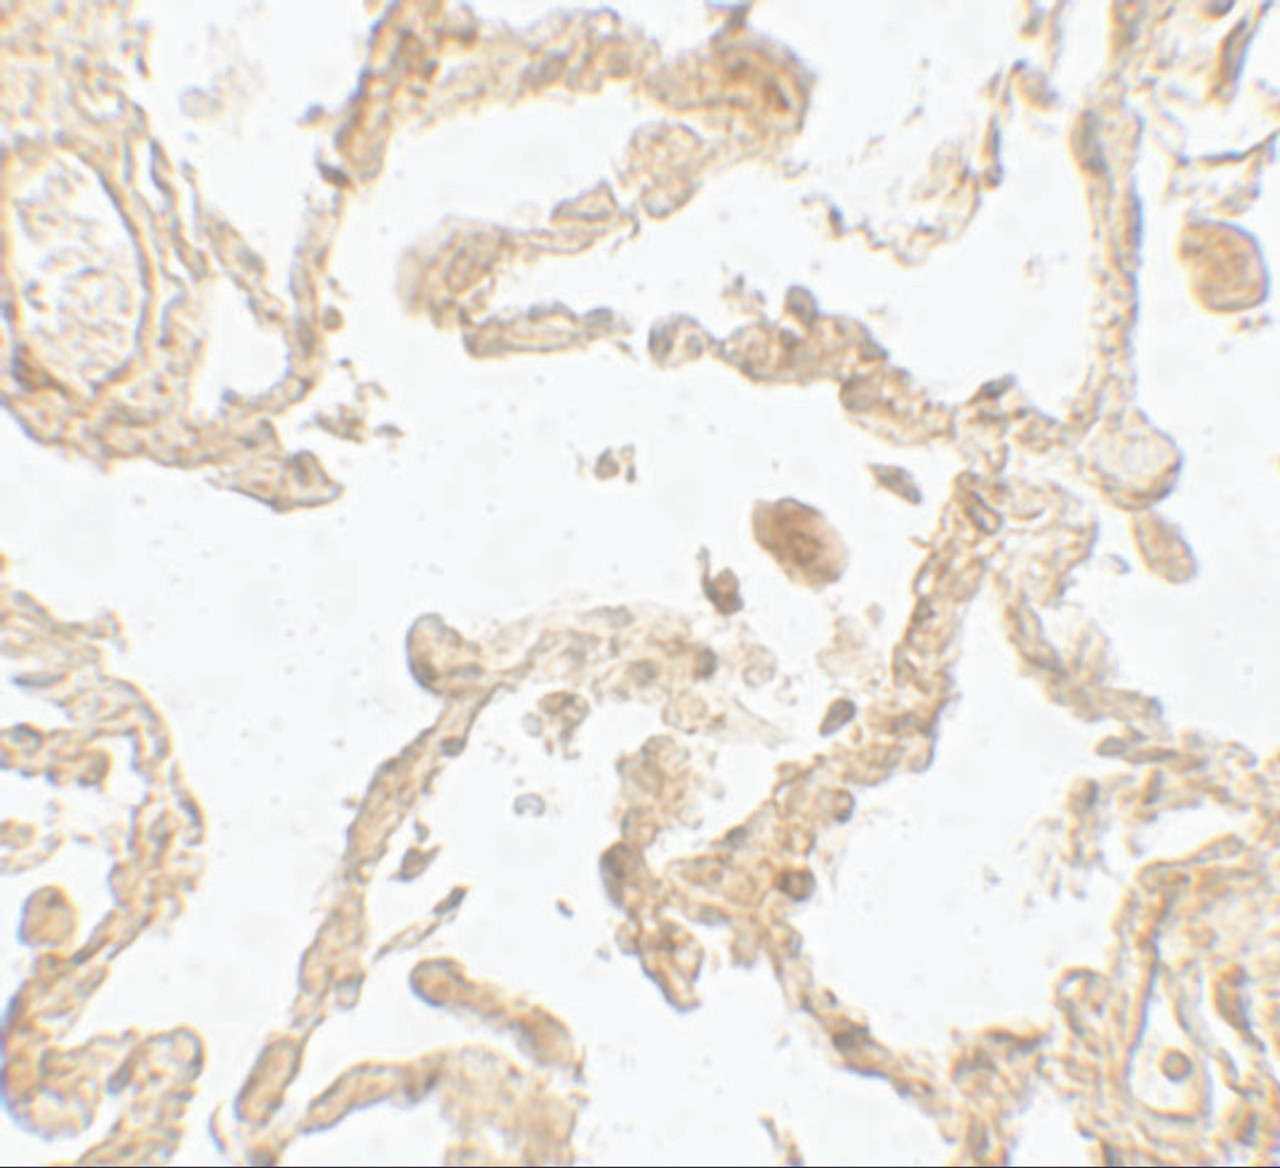 Immunohistochemistry of SUZ12 in human lung tissue with SUZ12 antibody at 5 ug/mL.